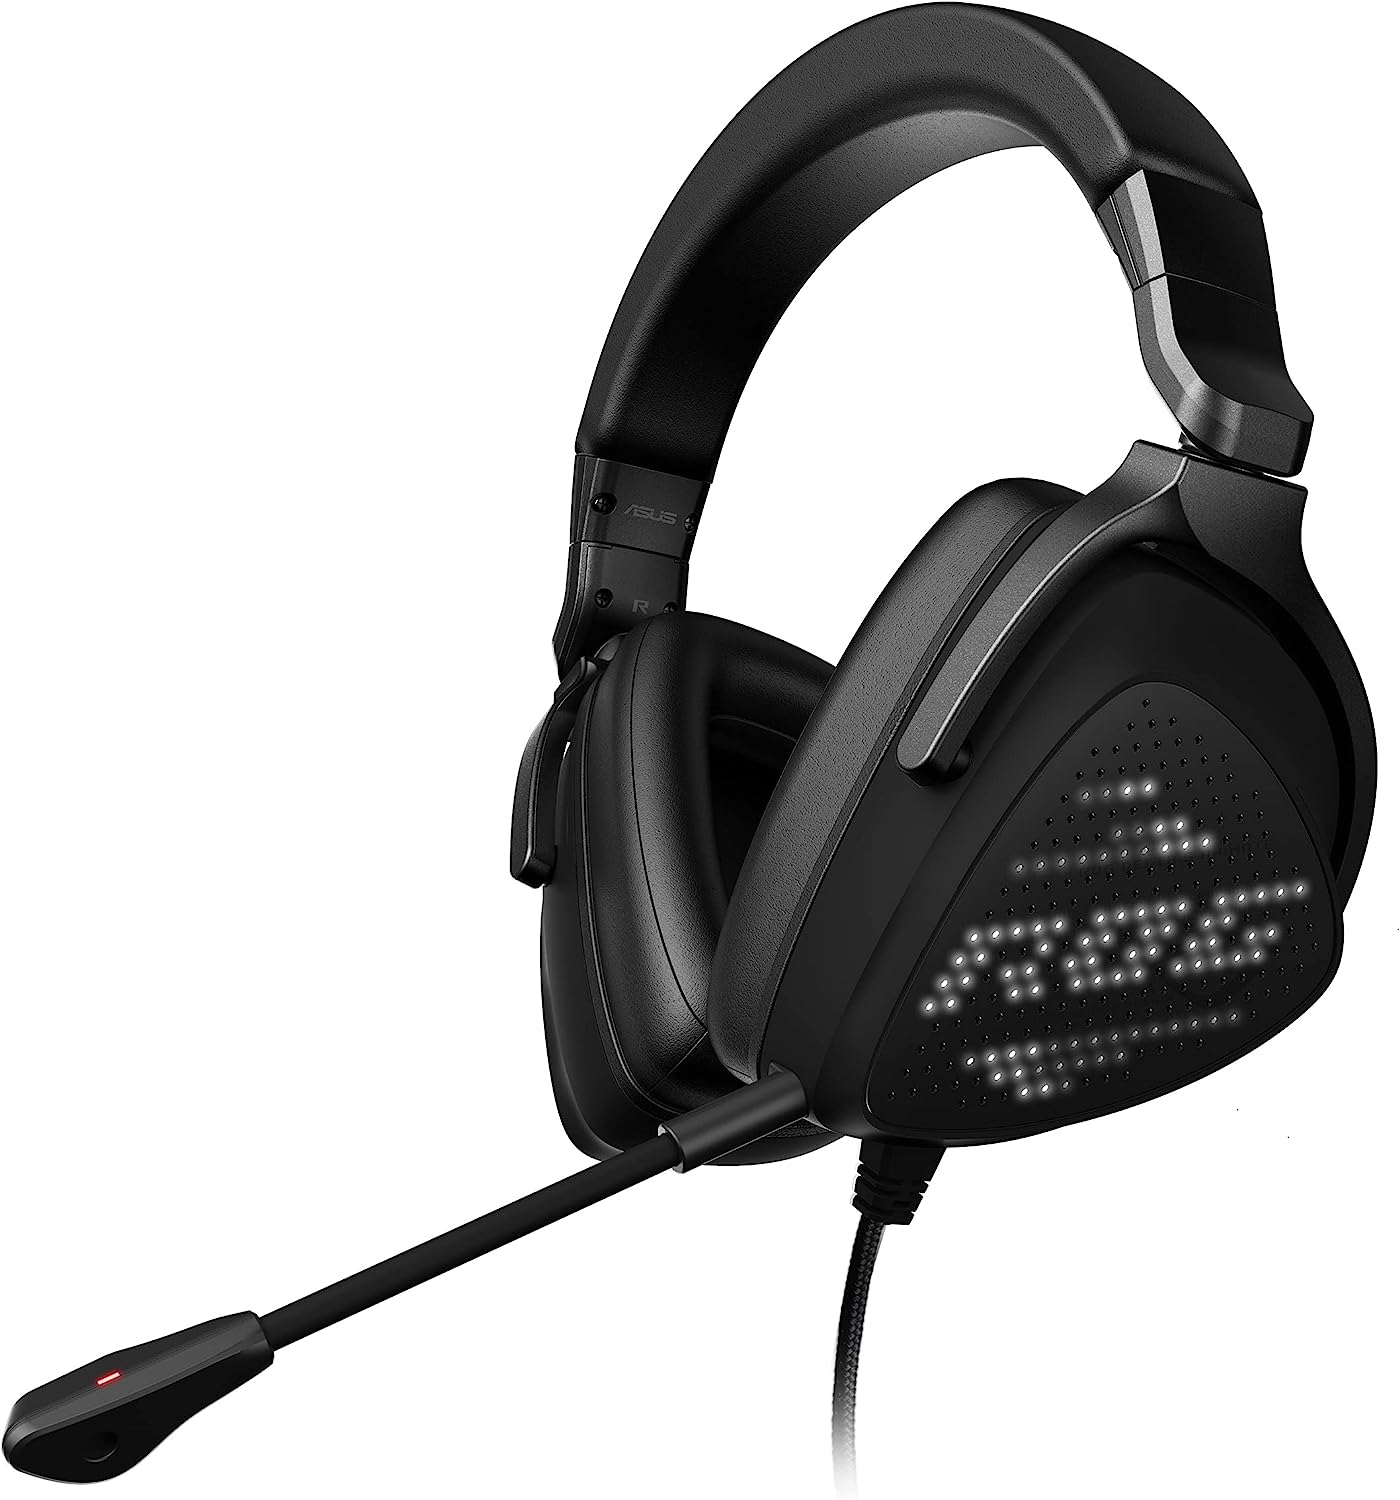 ASUS ROG Delta S Animate Gaming Headset Spotted Selling at an All-Time Low After a 45% Discount on Amazon: Here's What to Expect